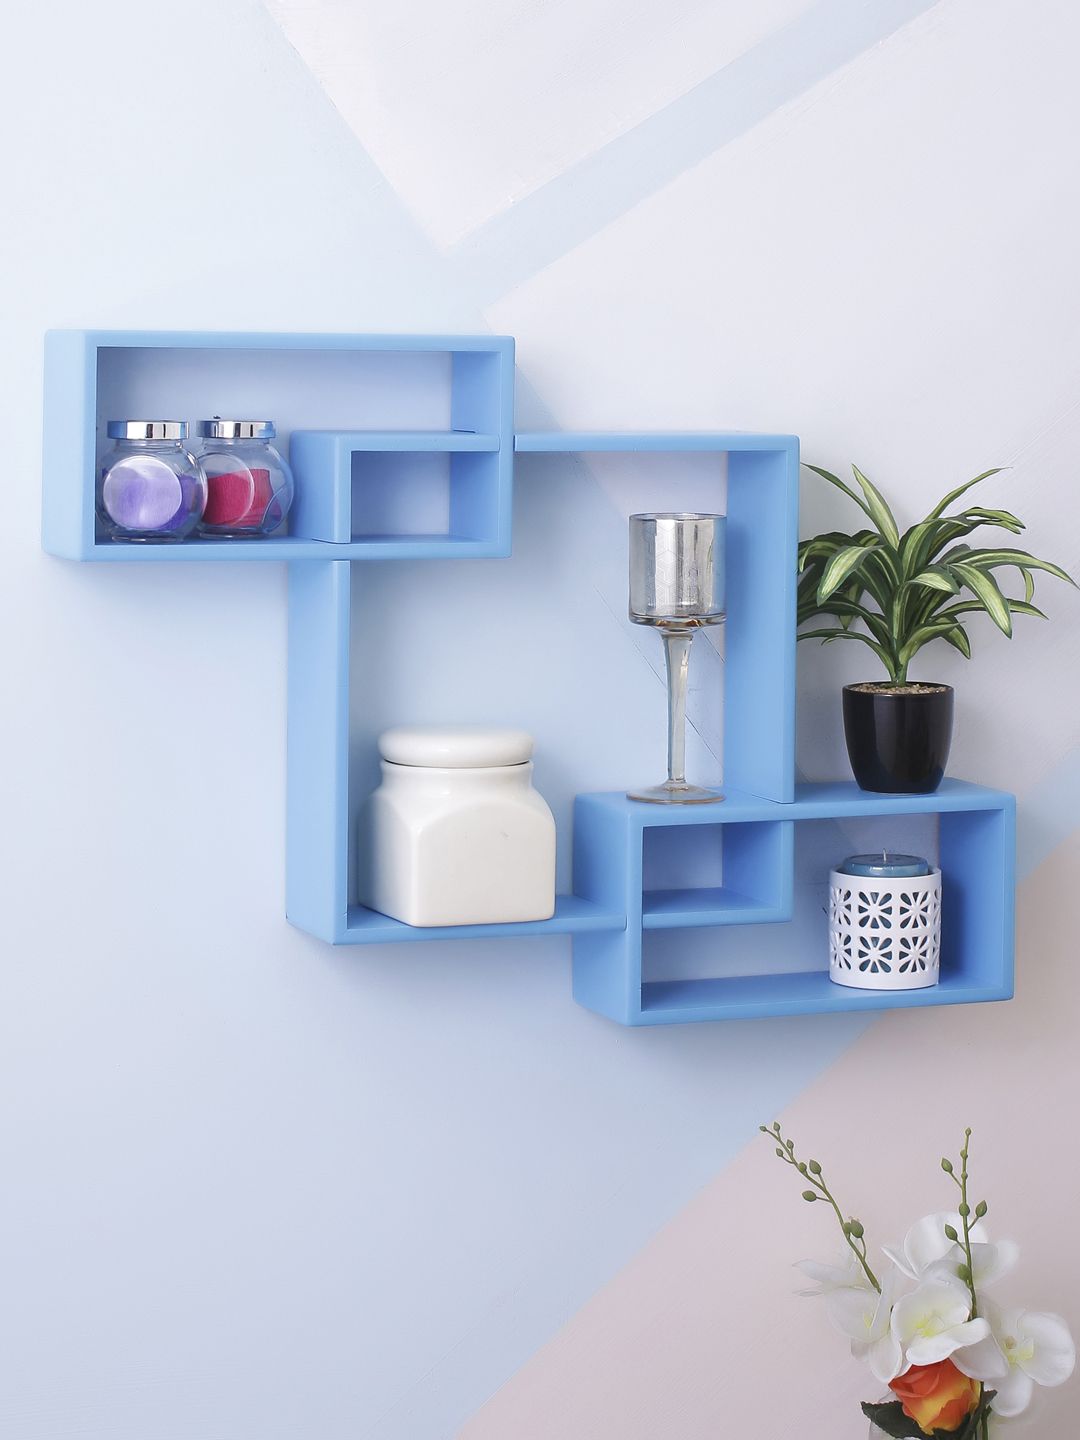 Home Sparkle Blue MDF Basic Wall Shelf Price in India